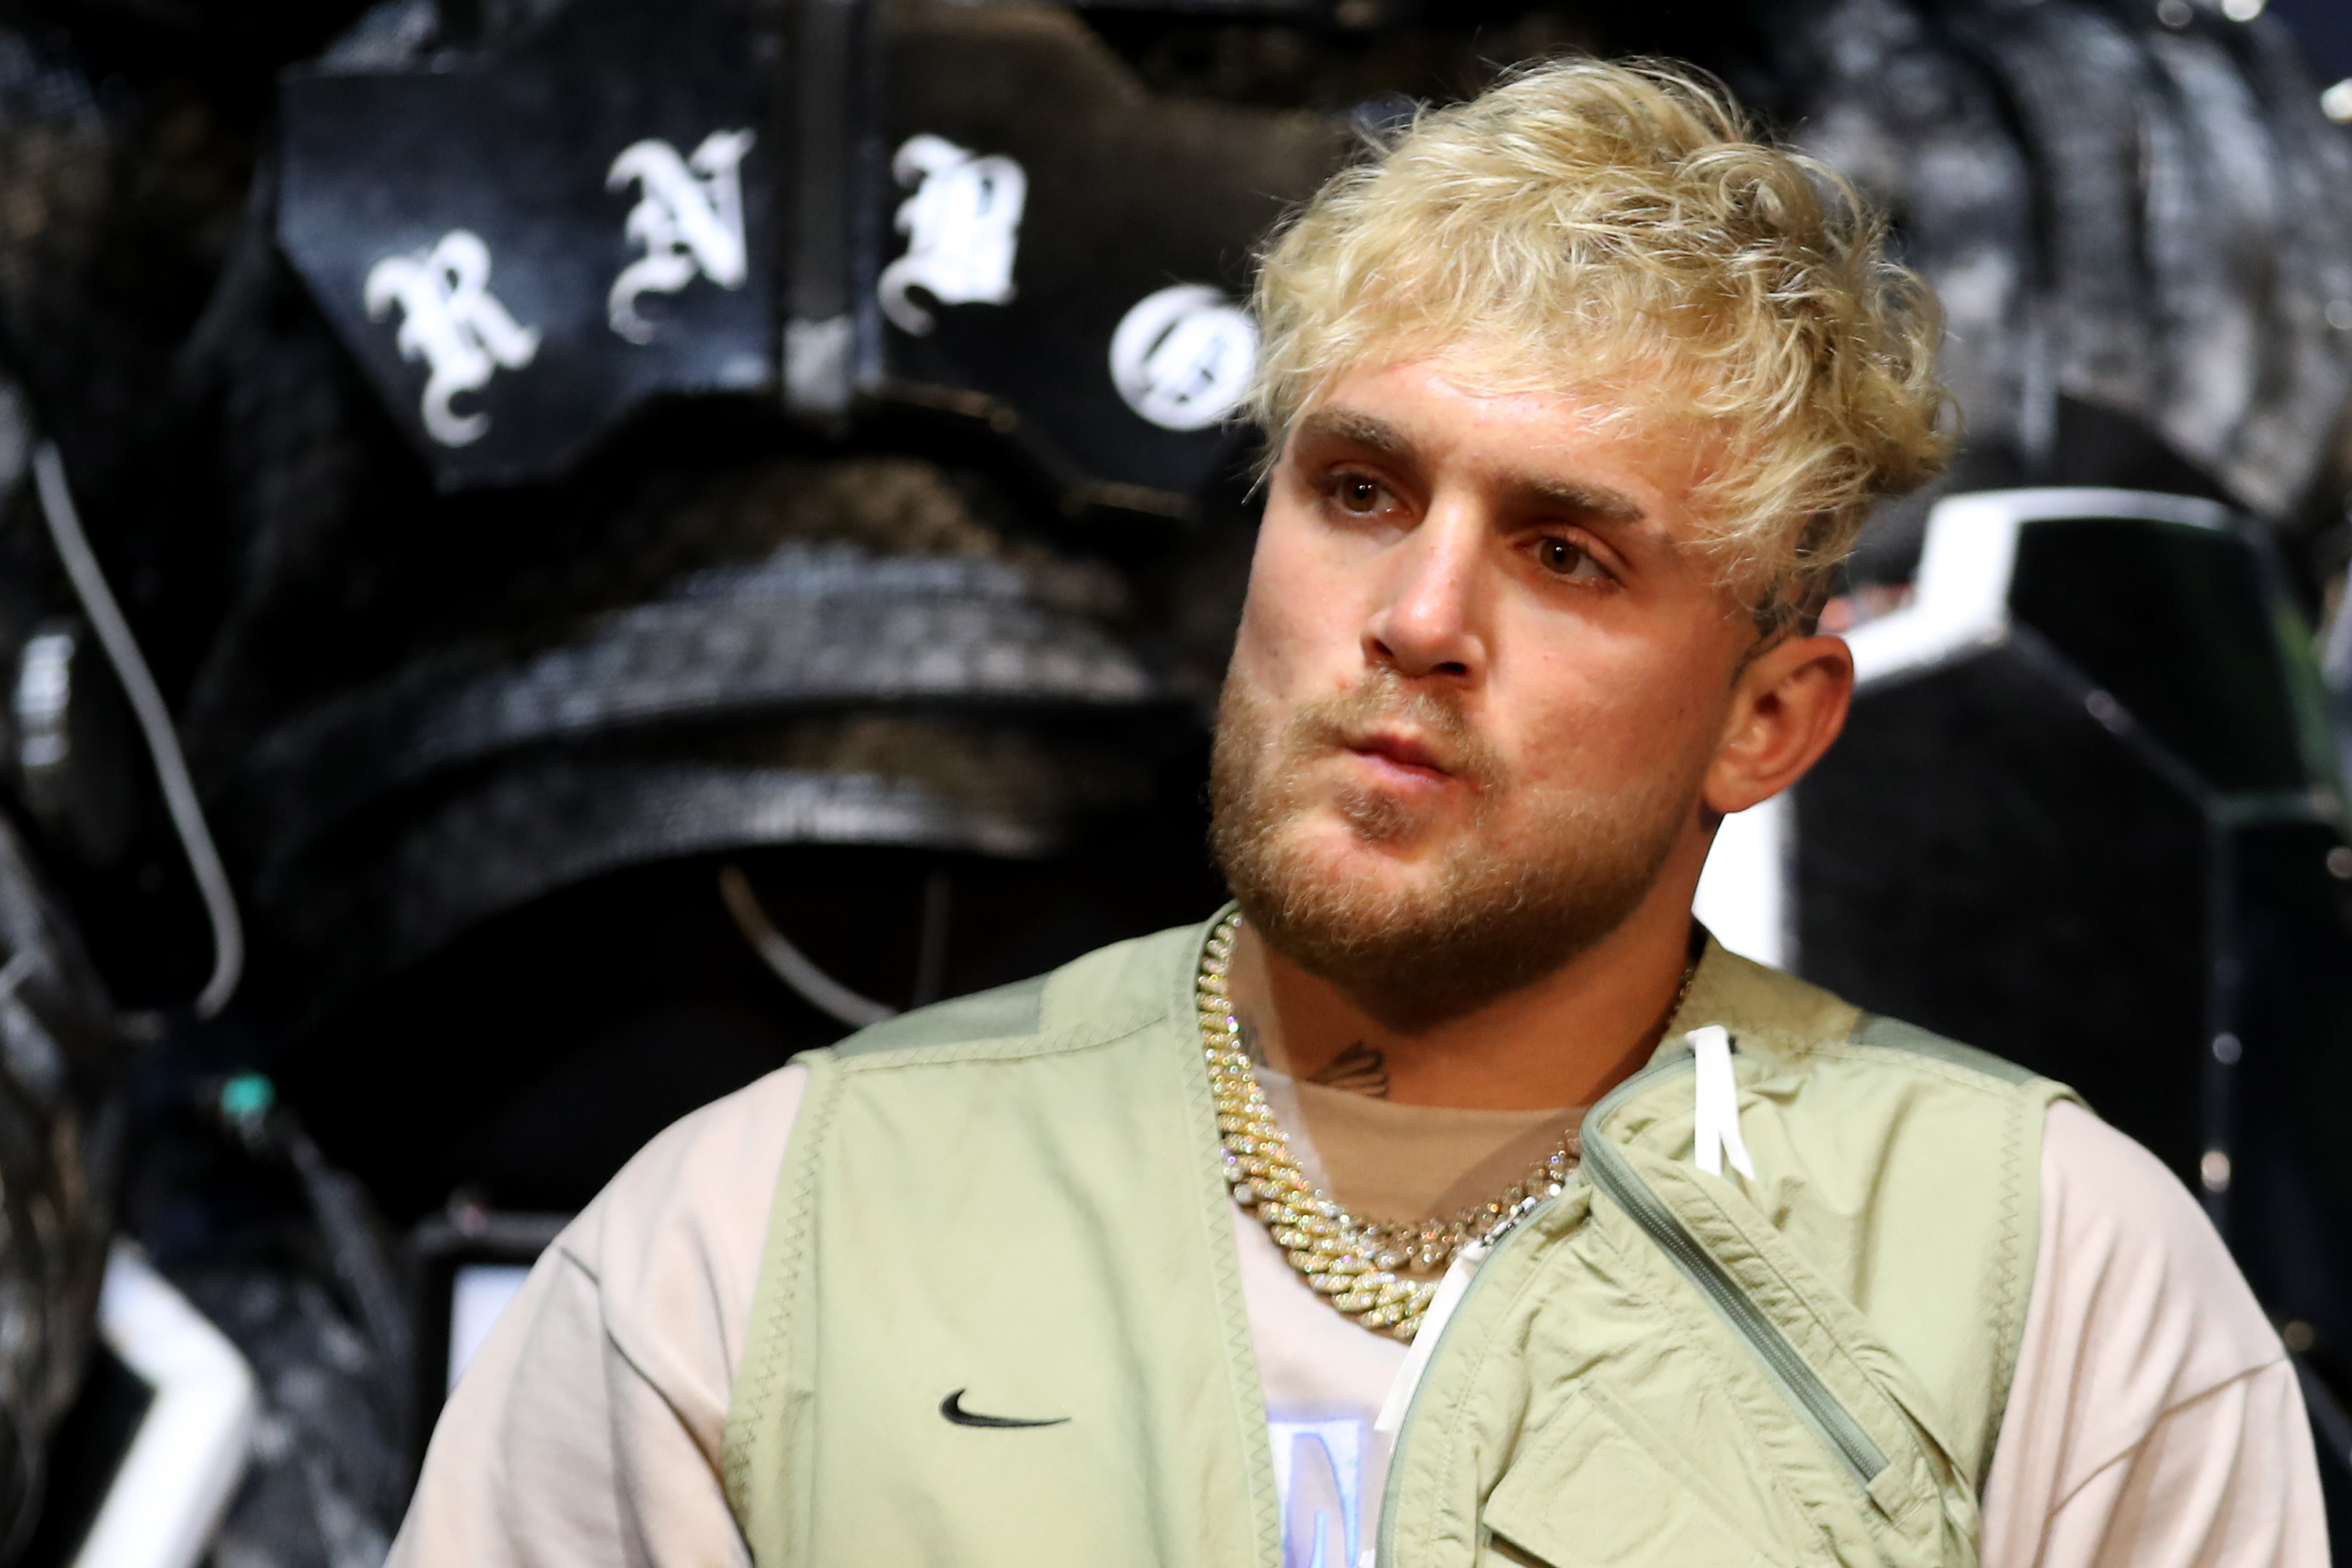 Jake Paul: Sky Bri Once Claimed Their Rumored Romance Was for 'Clout'